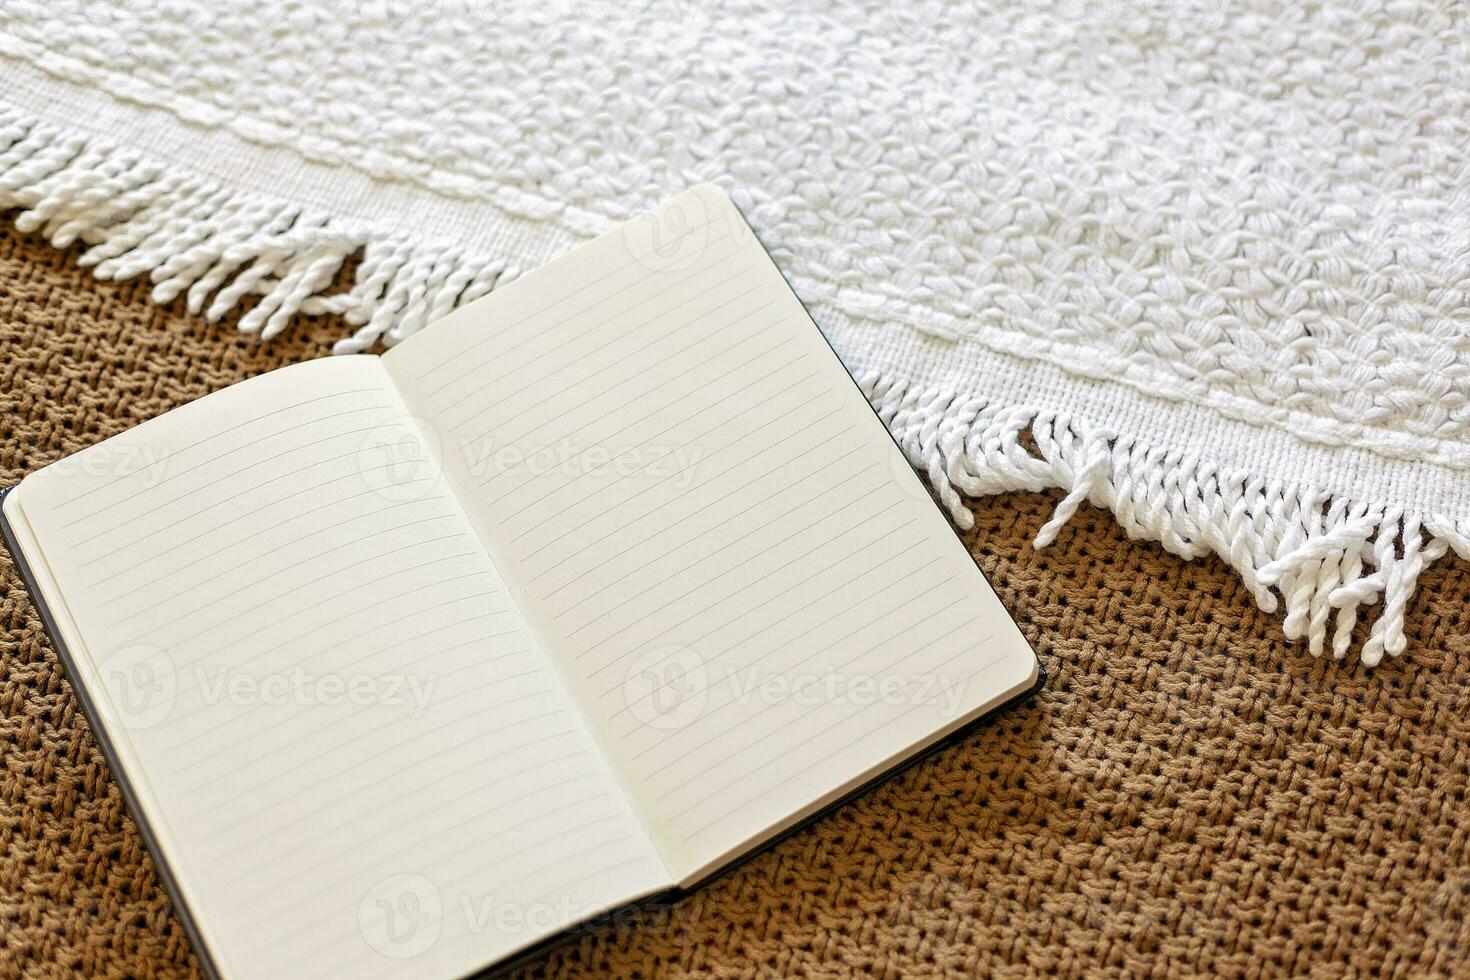 My love diary - The daily journal. Personal diary on knitted woolen textile. Keeping a Diary or Journal recording everyday thoughts photo